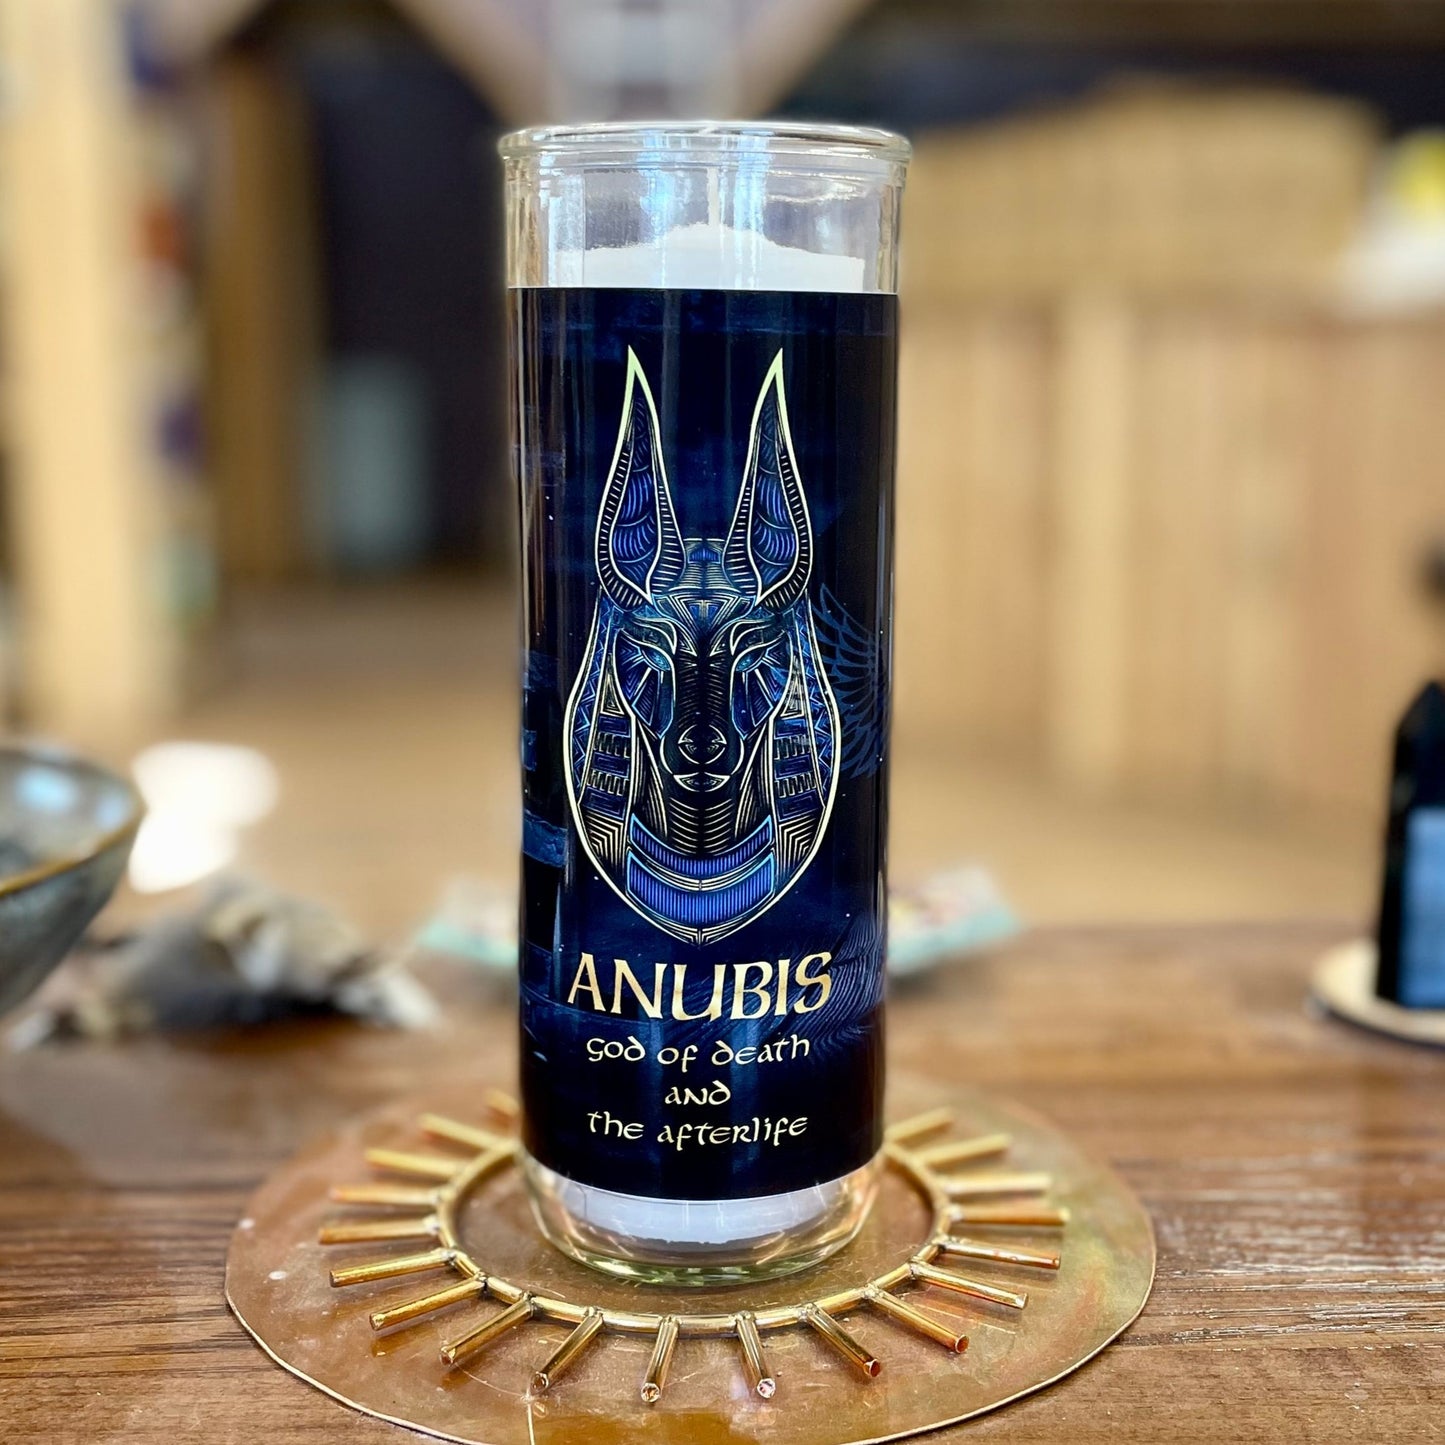 Anubis Refillable Candle - North Witch Magick Co.